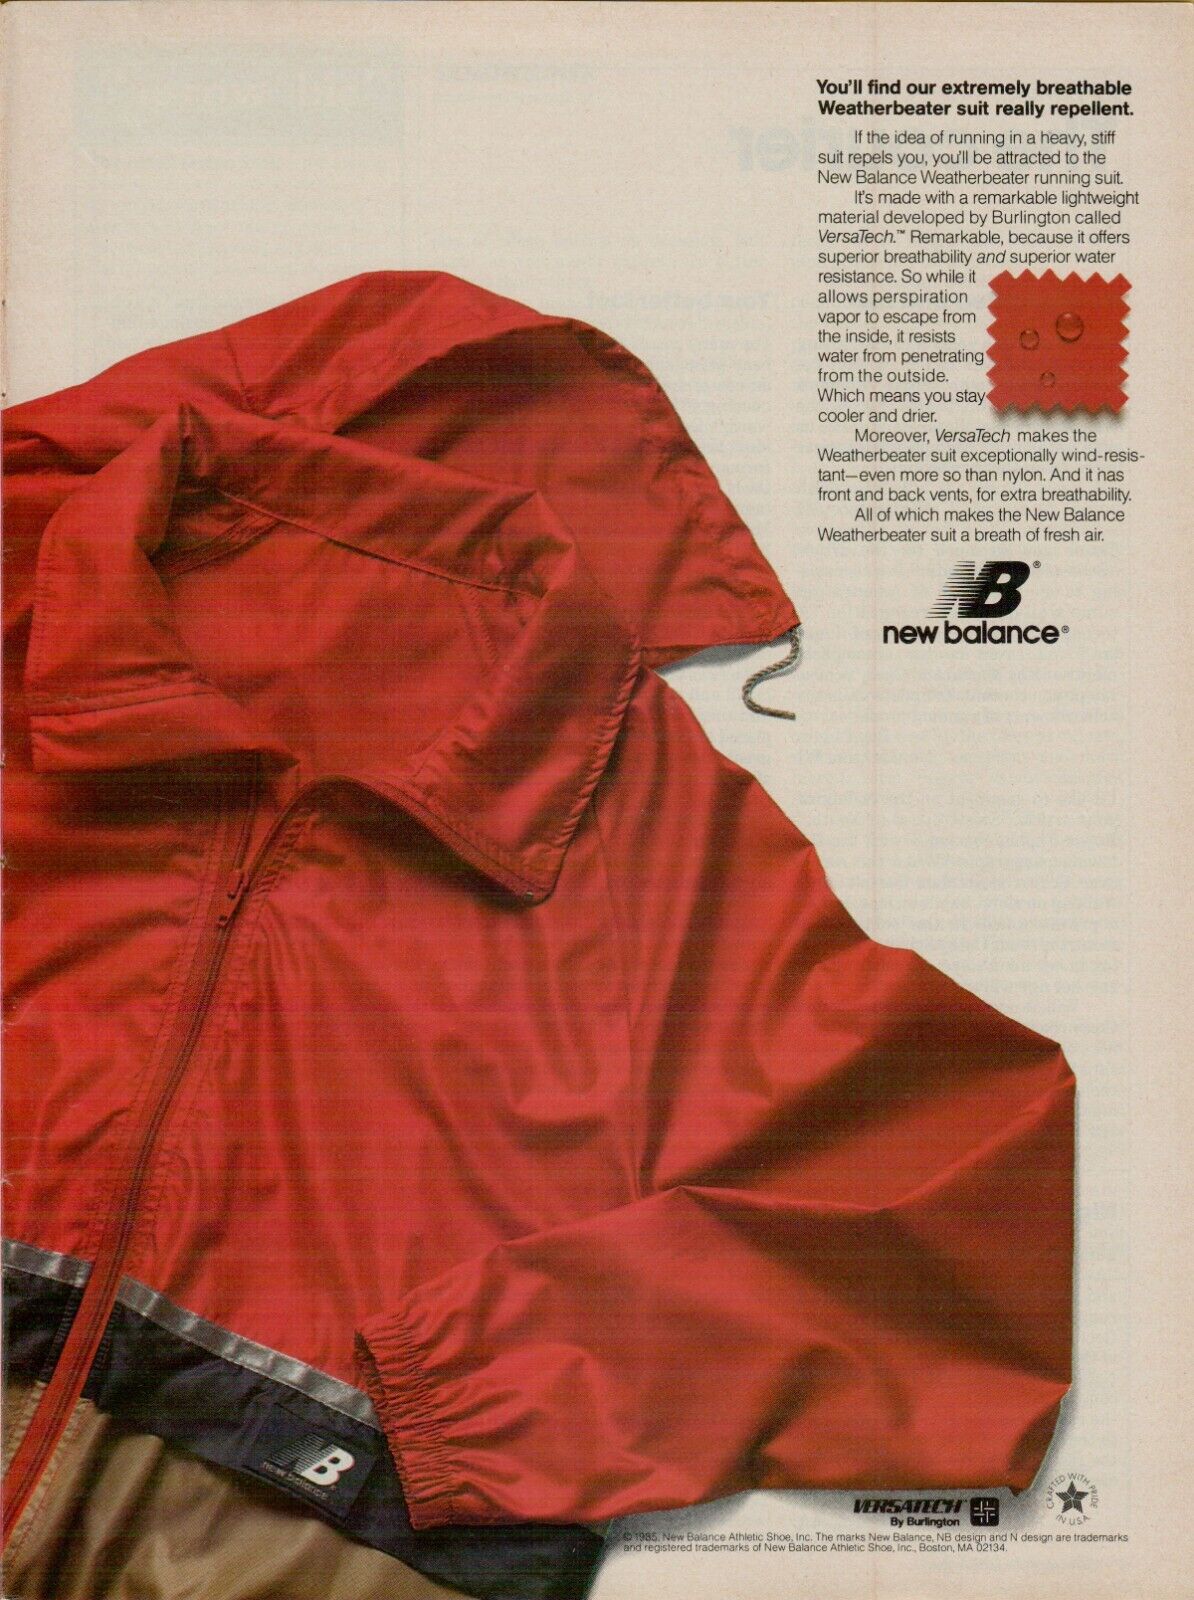 1986 New Balance Extremely Breathable Weatherbeater Suit Vintage Color Print Ad